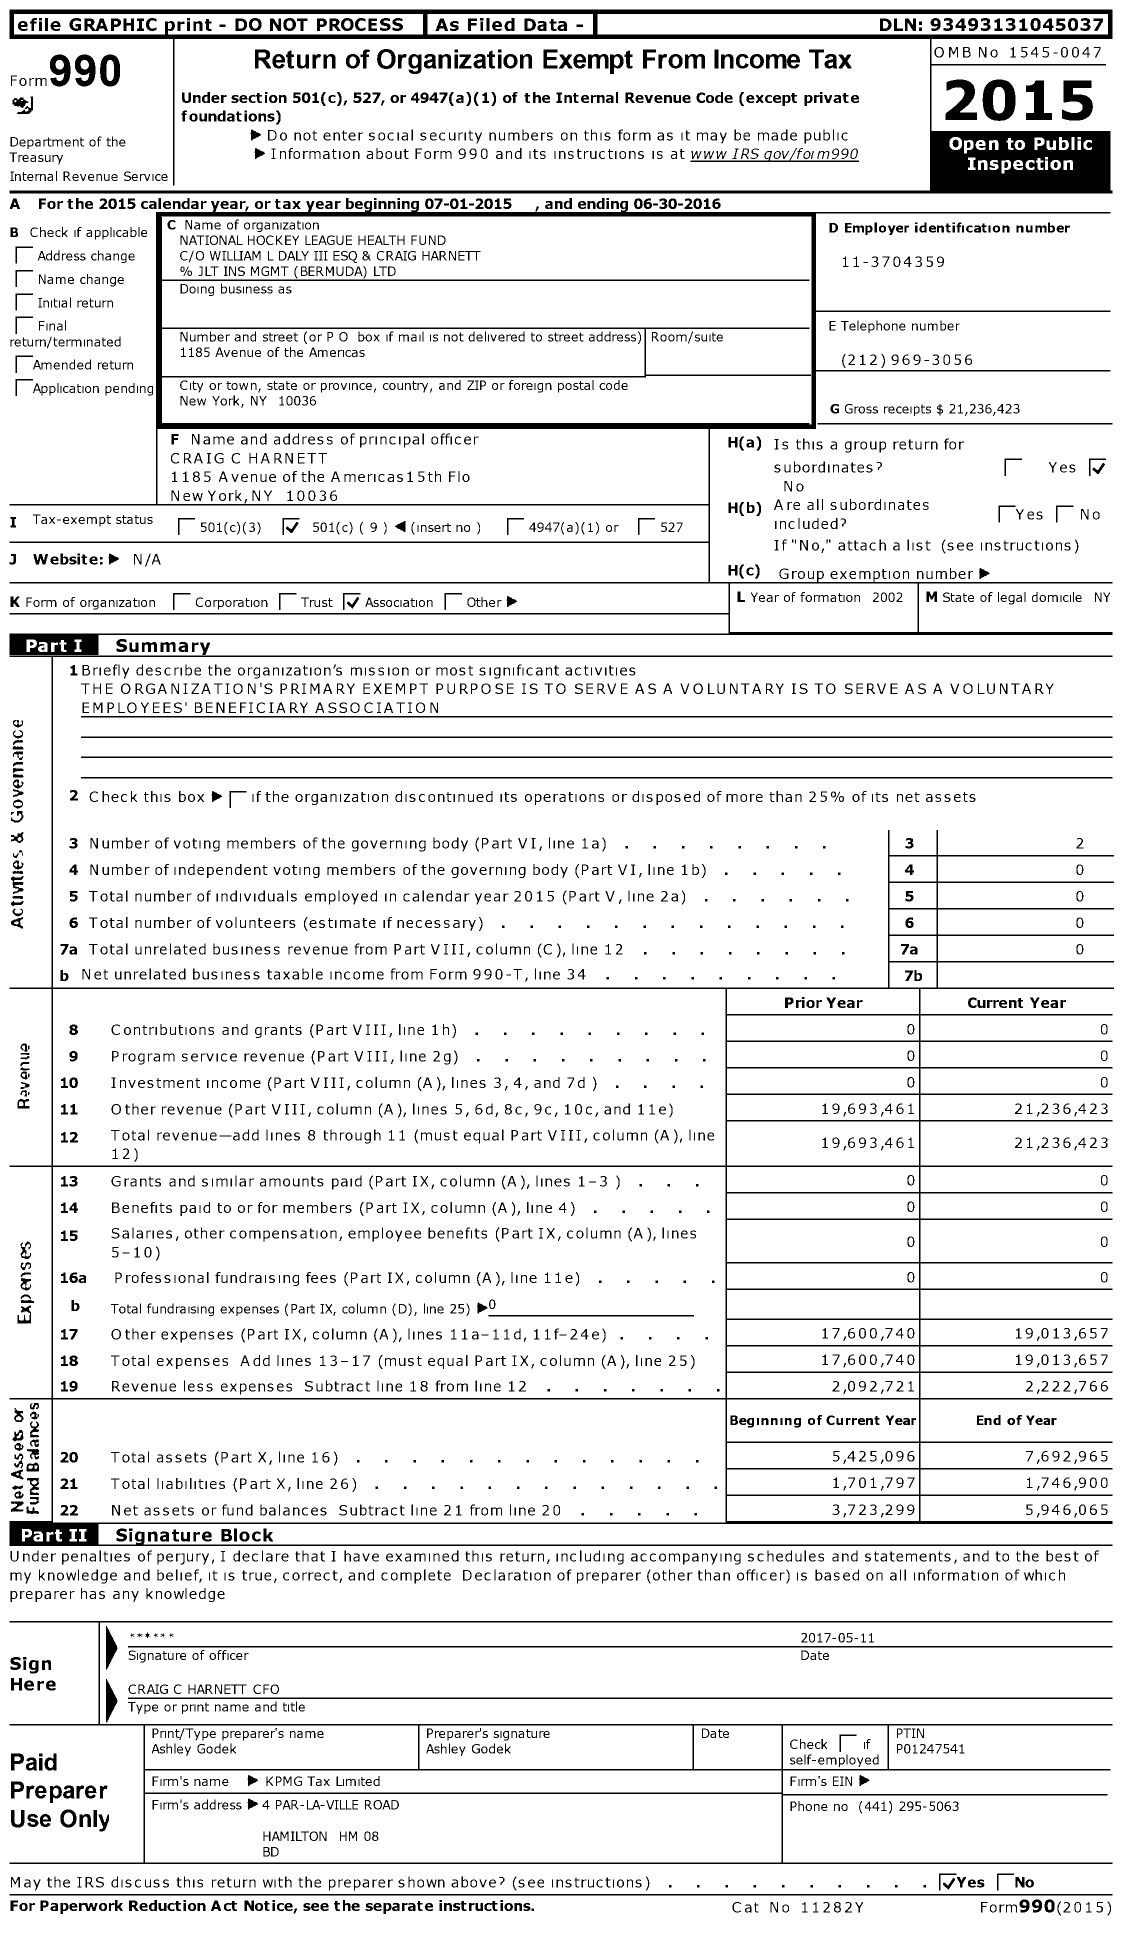 Image of first page of 2015 Form 990O for National Hockey League Health Fund